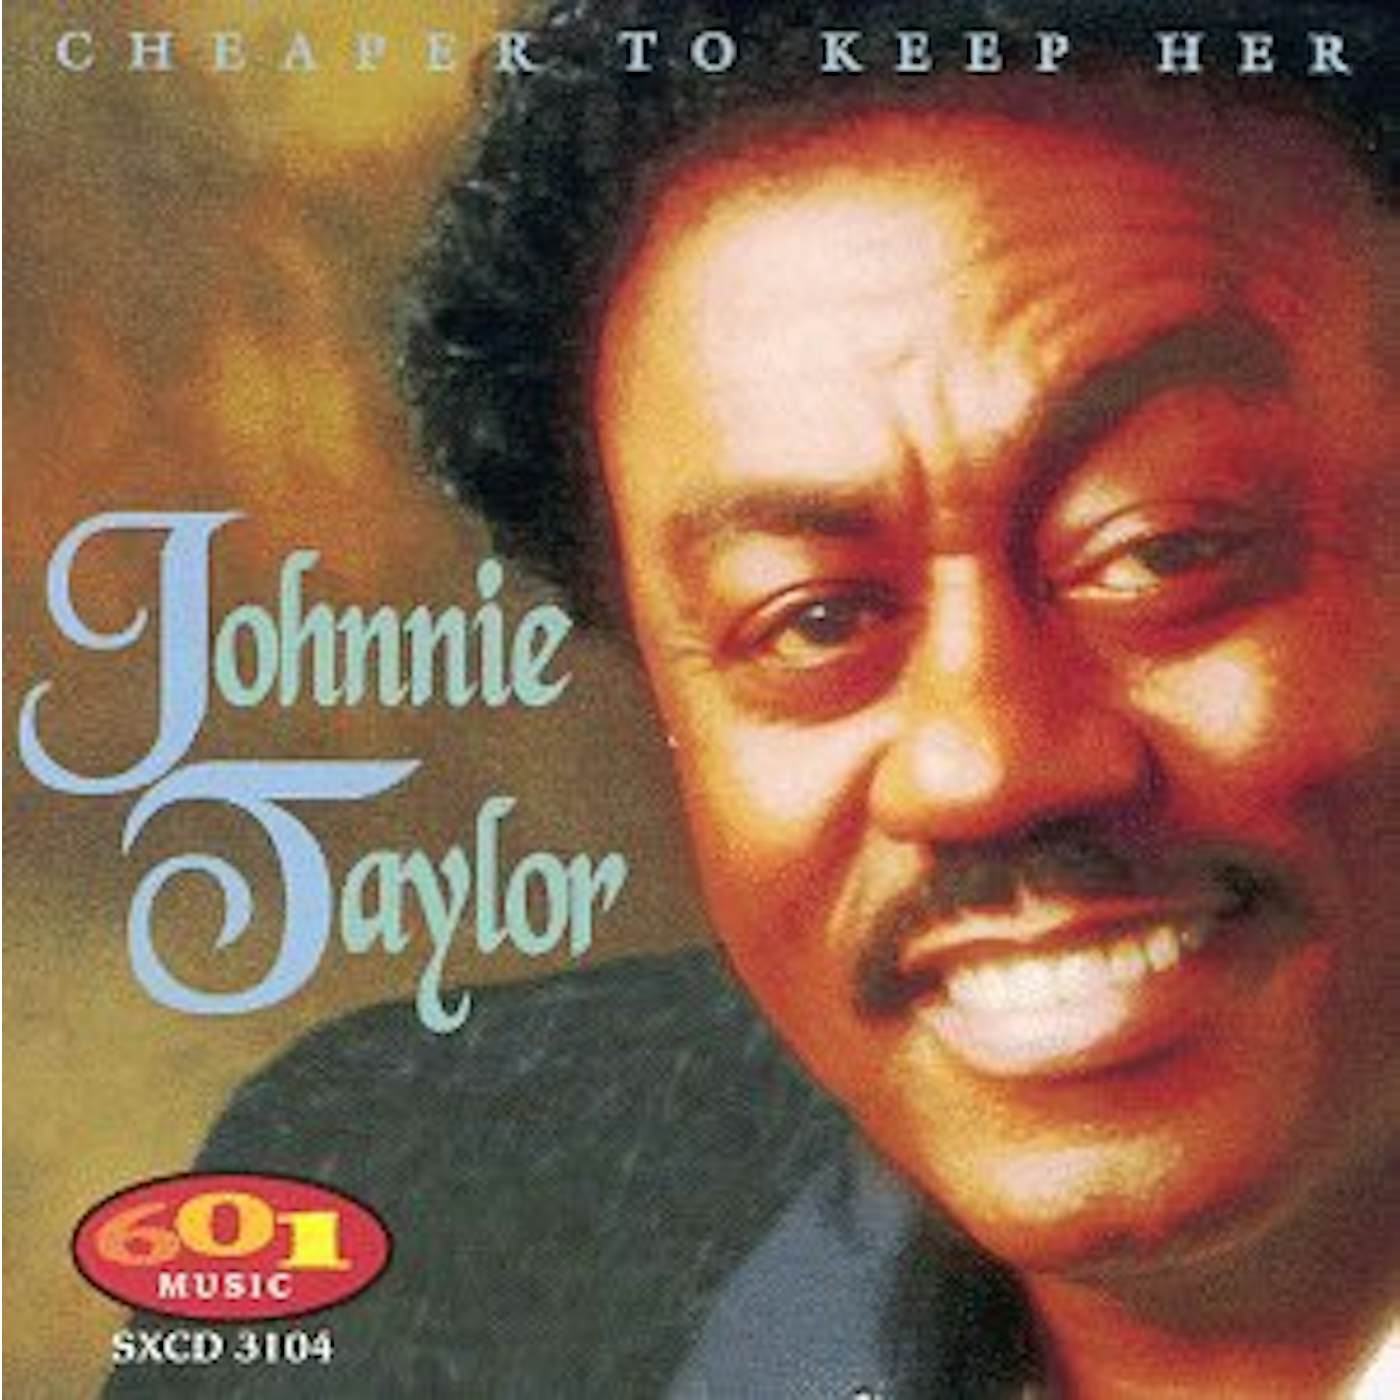 Johnnie Taylor CHEAPER TO KEEP HER CD